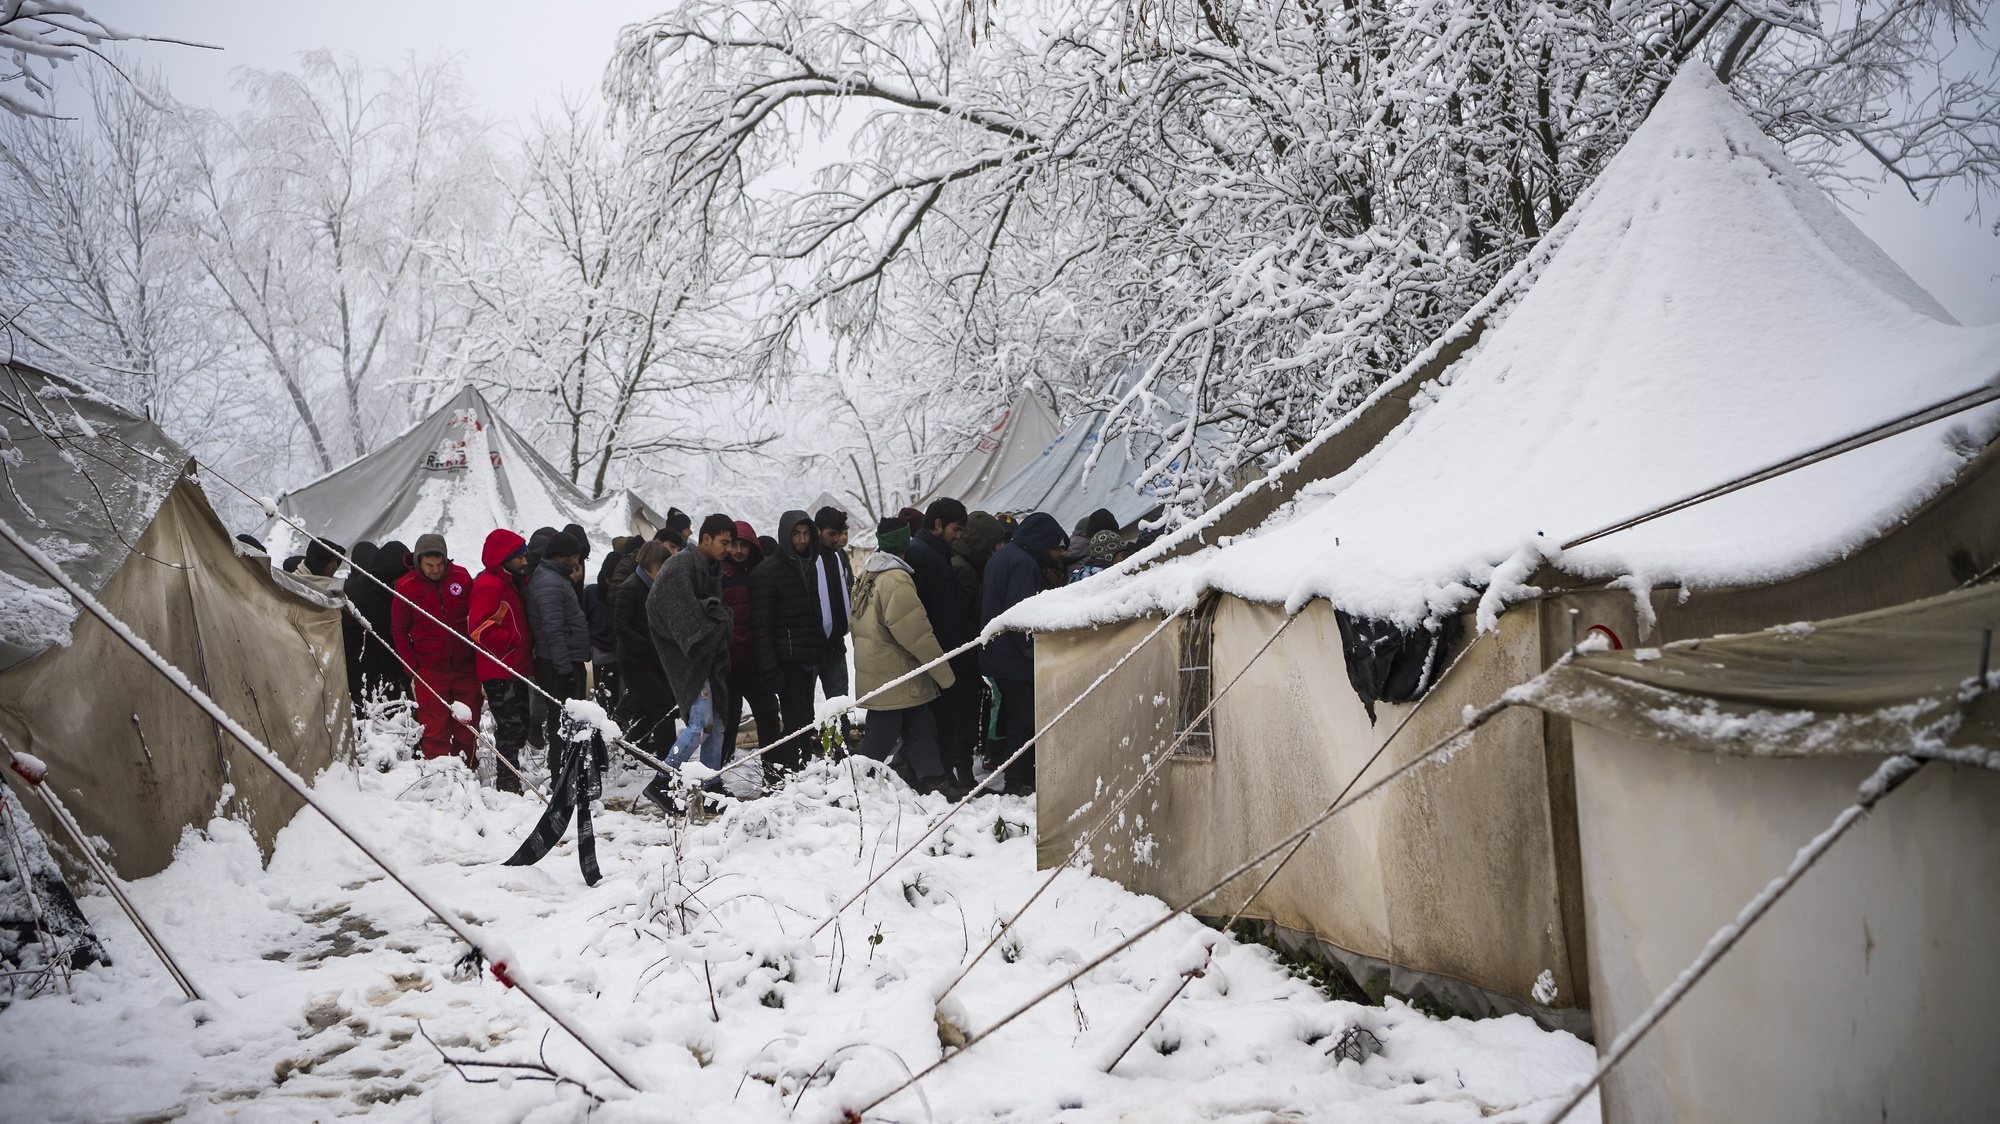 epa08041075 Migrants stand outside from tent during a winter day covered by snow at the Vucjak refugee camp outside Bihac, northwestern Bosnia and Herzegovina, 03 December 2019. According to local media, hundreds of people remain at the camp even after International officials called for it to be shut down.  EPA/JEAN-CHRISTOPHE BOTT